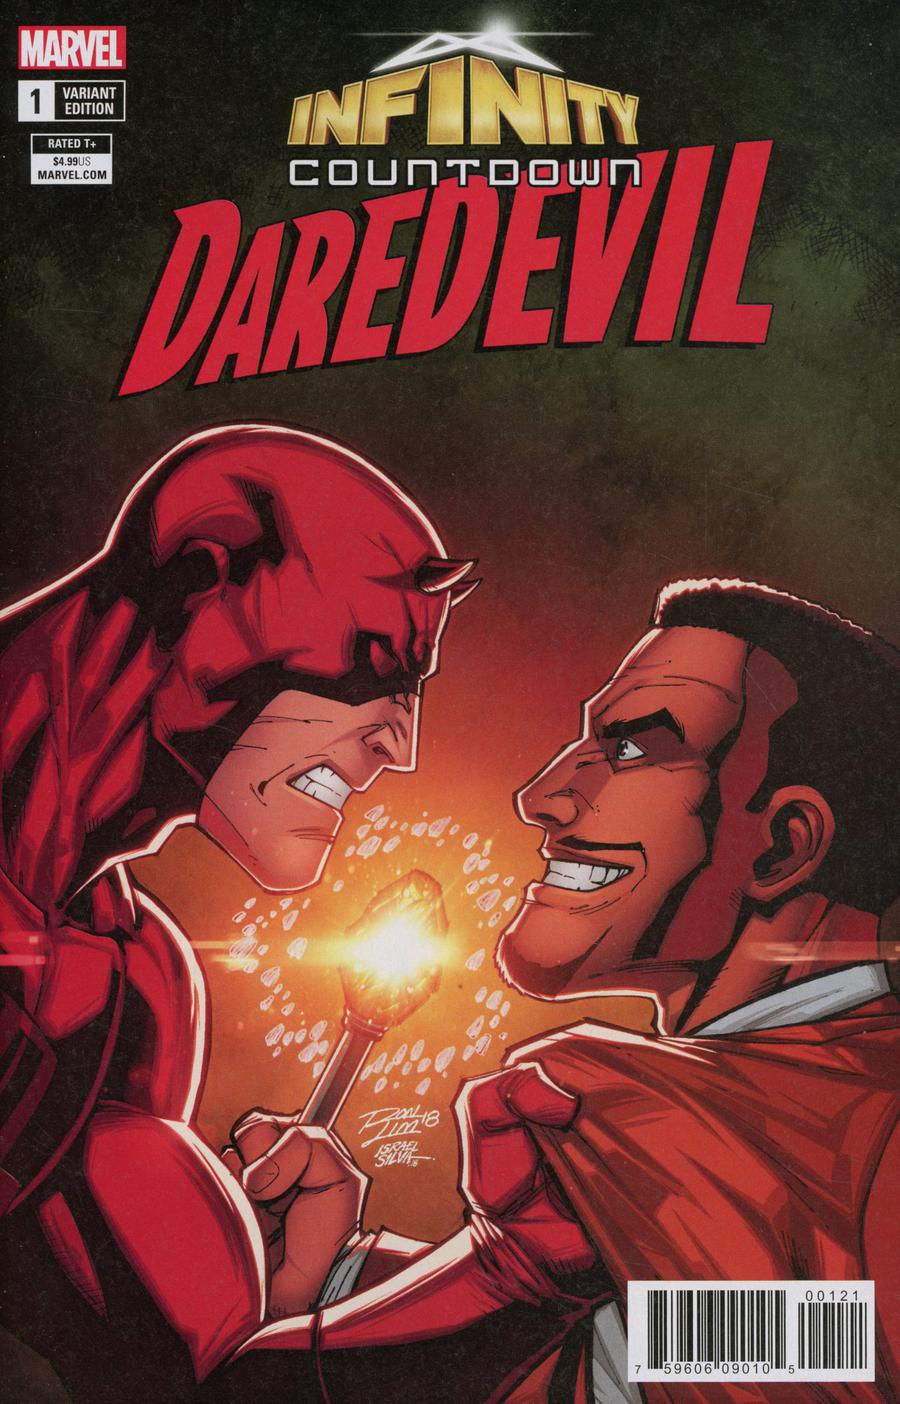 Infinity Countdown: Daredevil #1 Variant Edition (Lim) [2018]